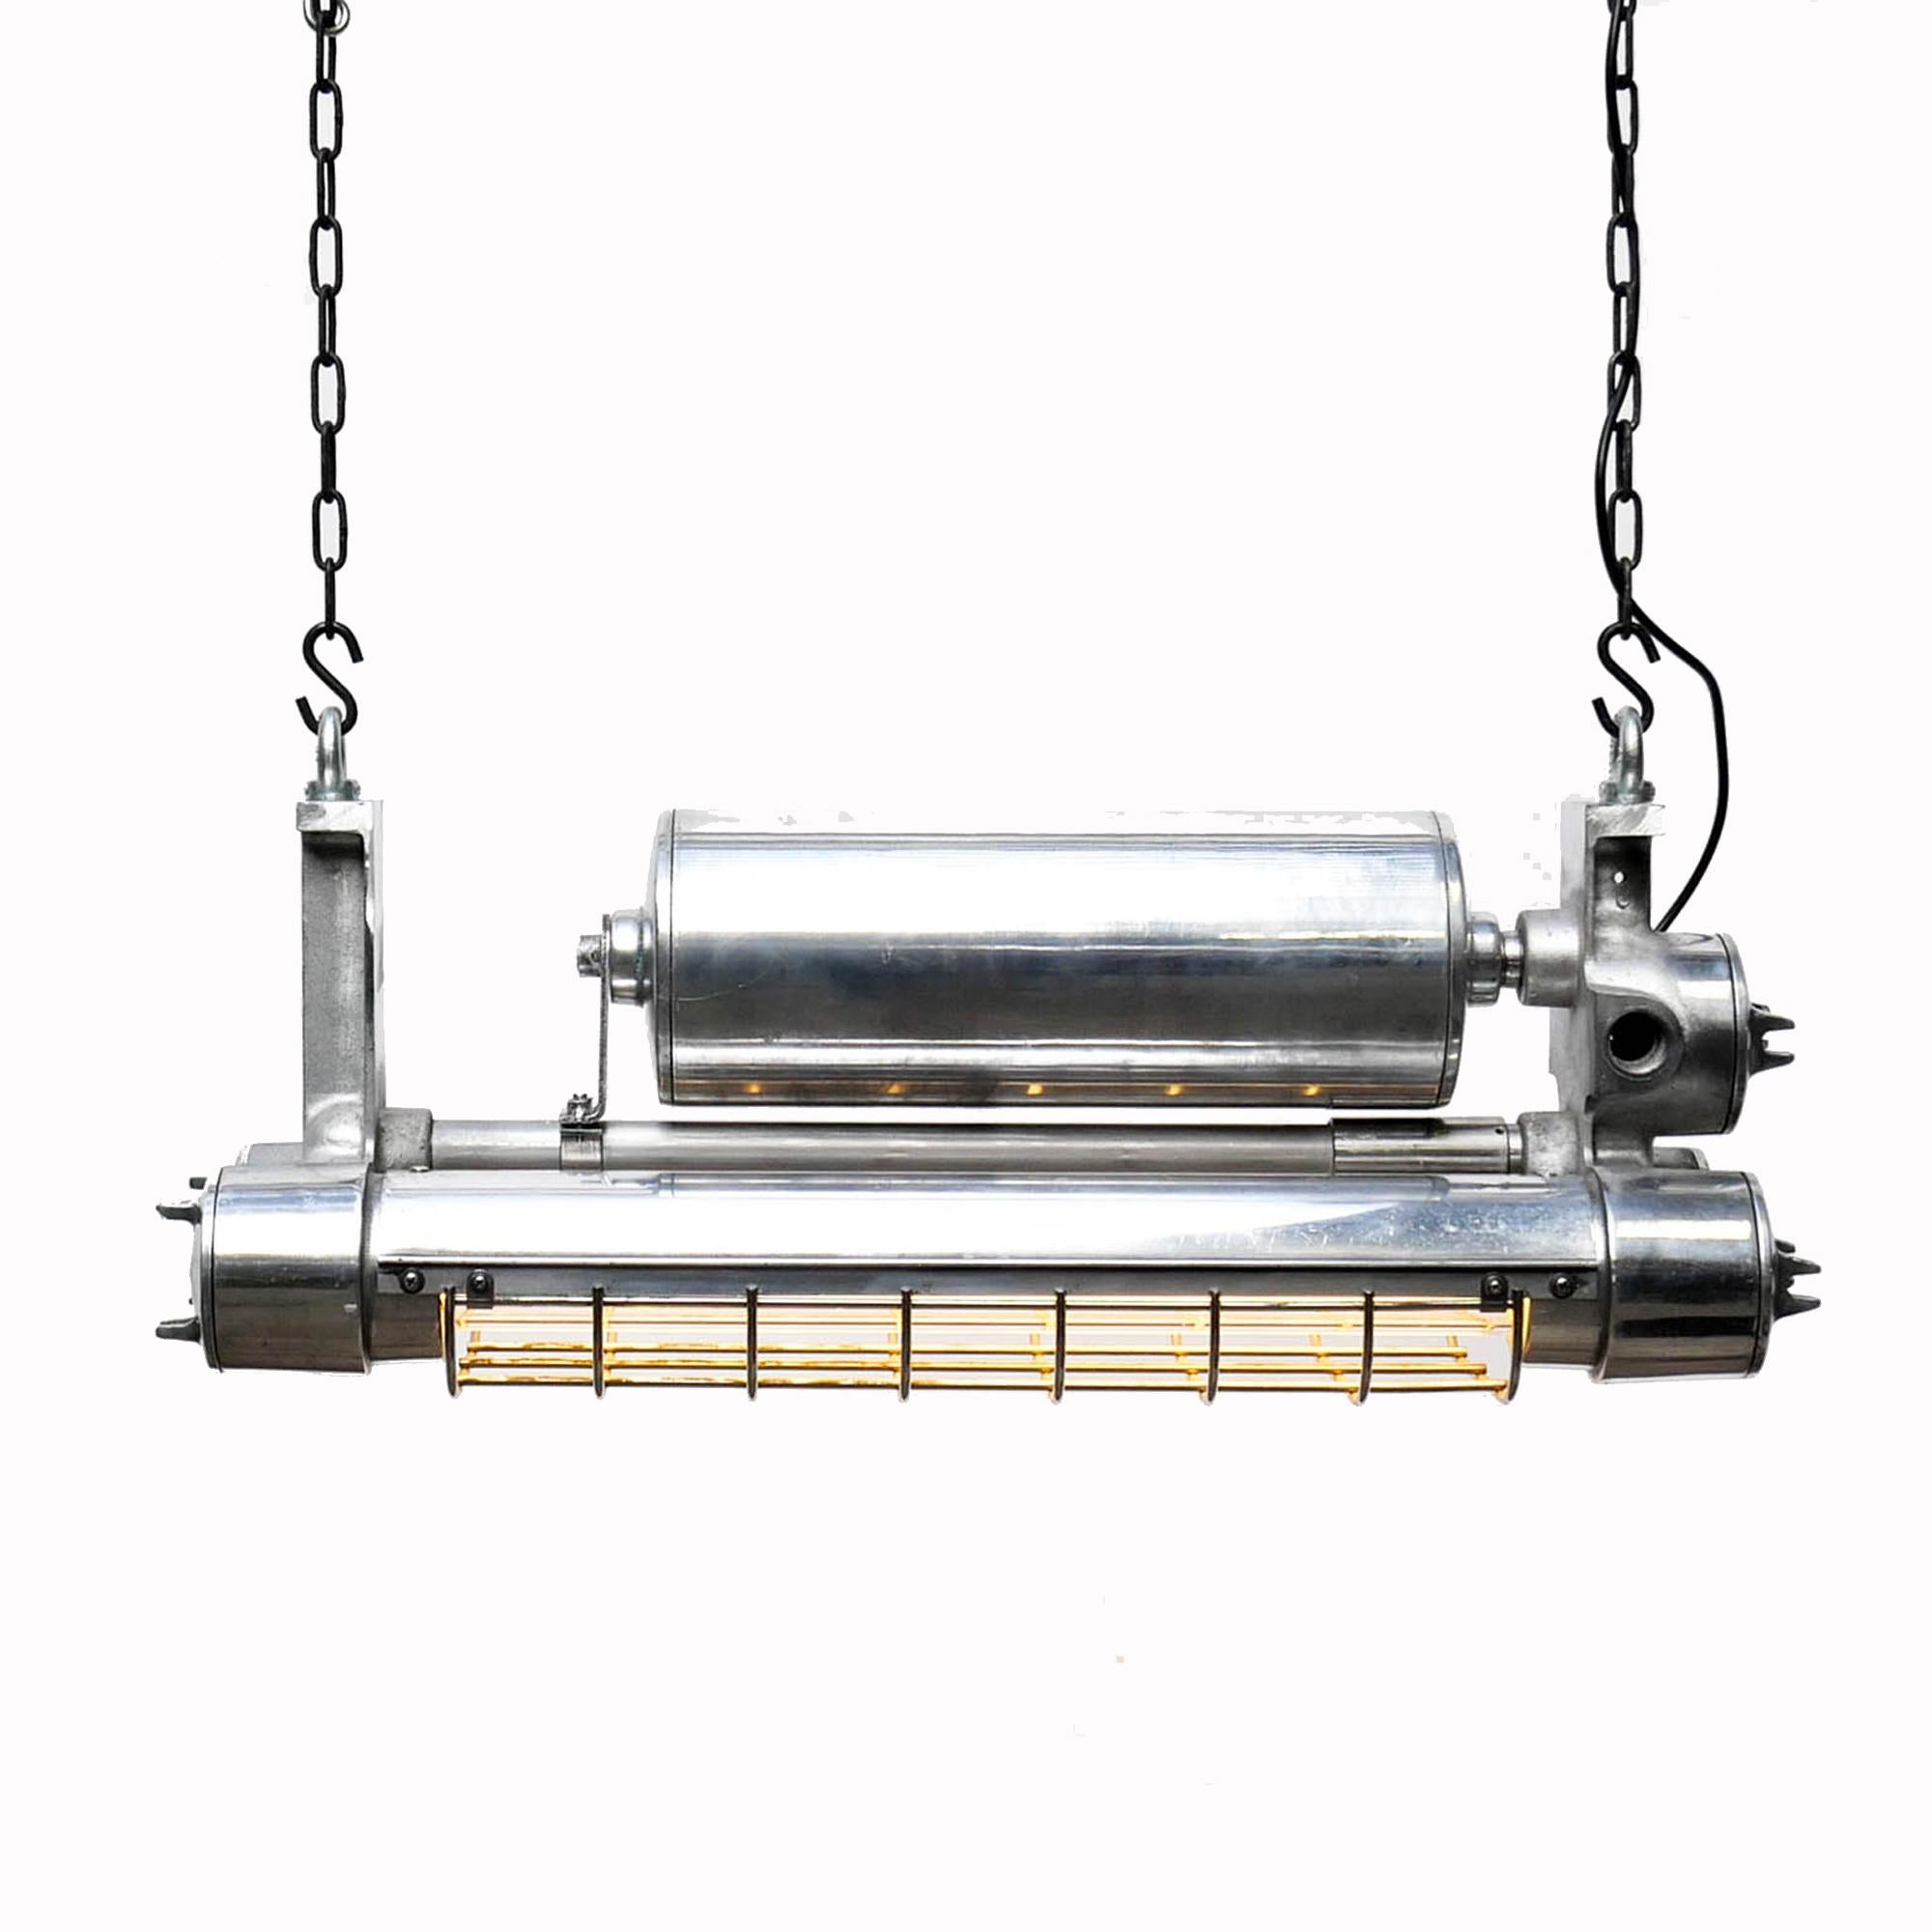 Cast aluminium fluorescent explosion-proof ceiling light, originally used on oil plateform. Fully restored, stripped, brushed polished and rewired with new electronic ballast (lighter) and fluorescent tubes commercially available (T8 2700K type,